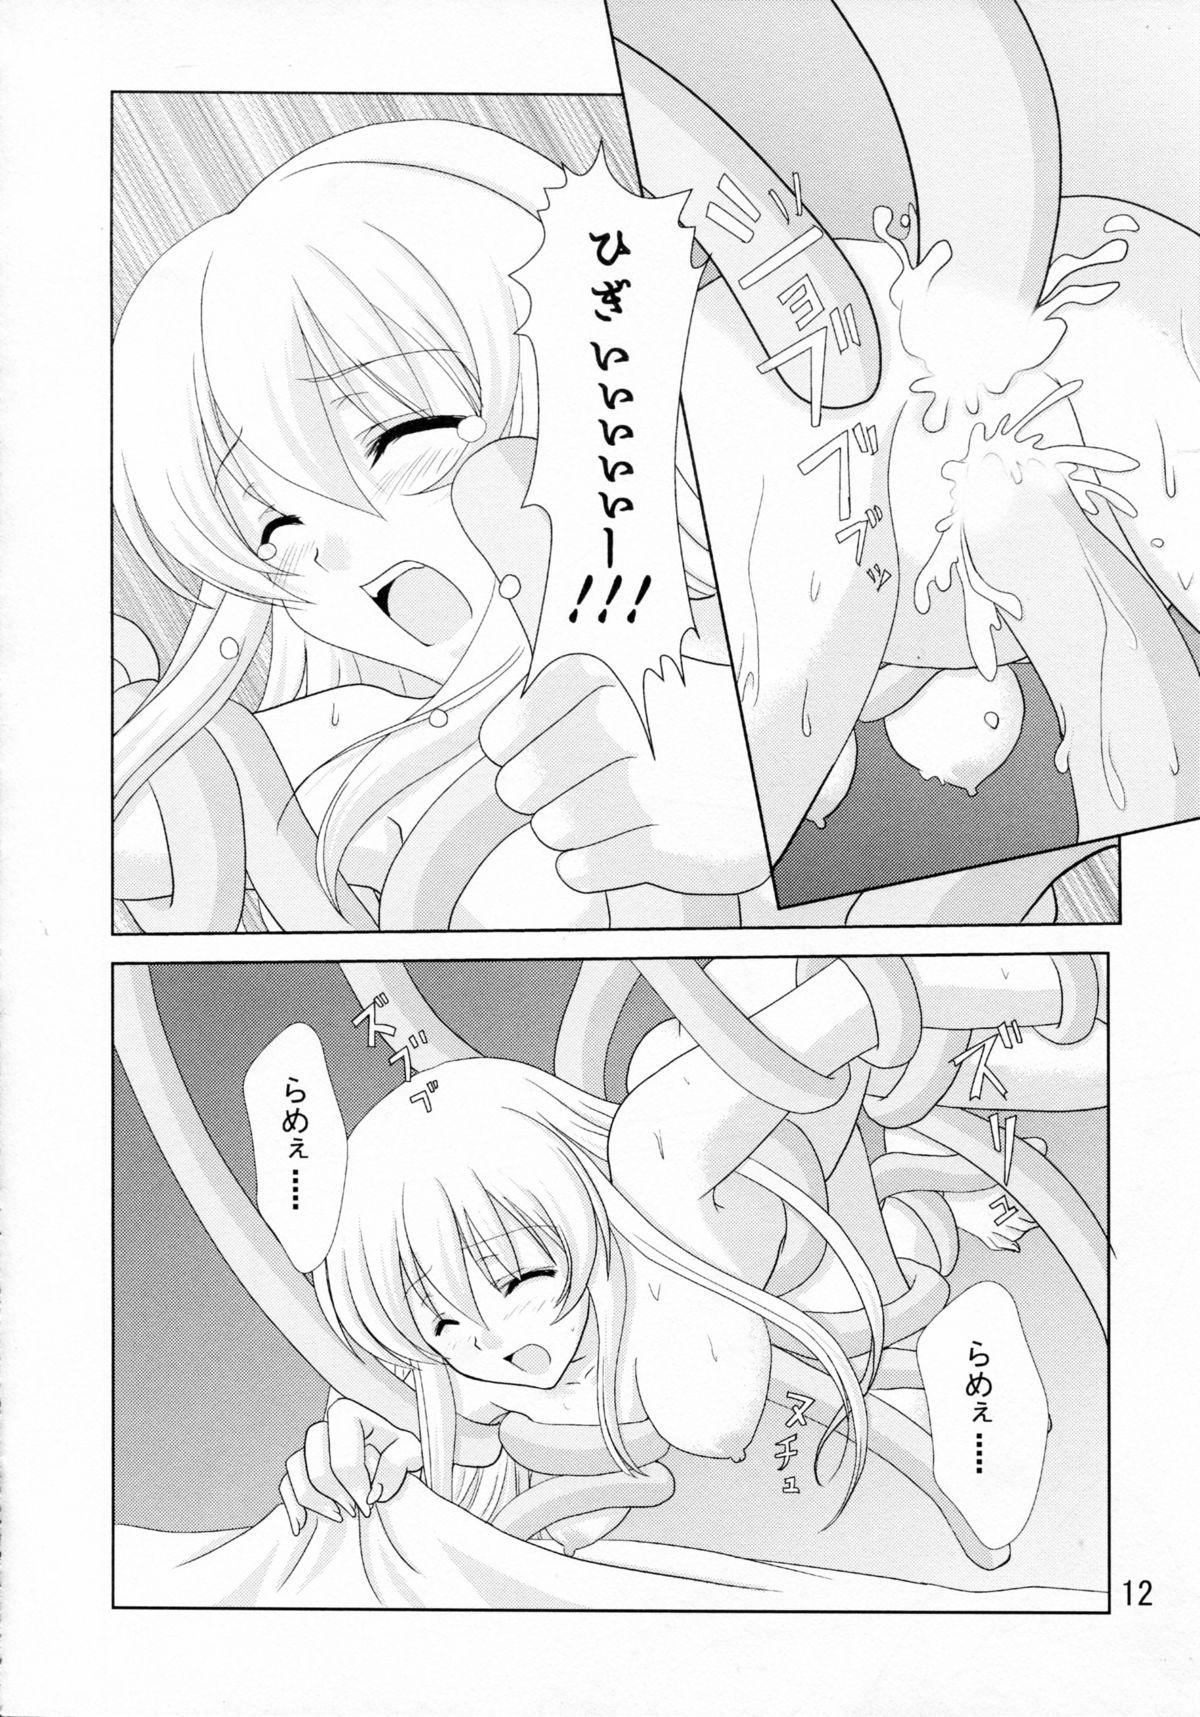 Harcore Ramee~ - Tower of druaga Gag - Page 12